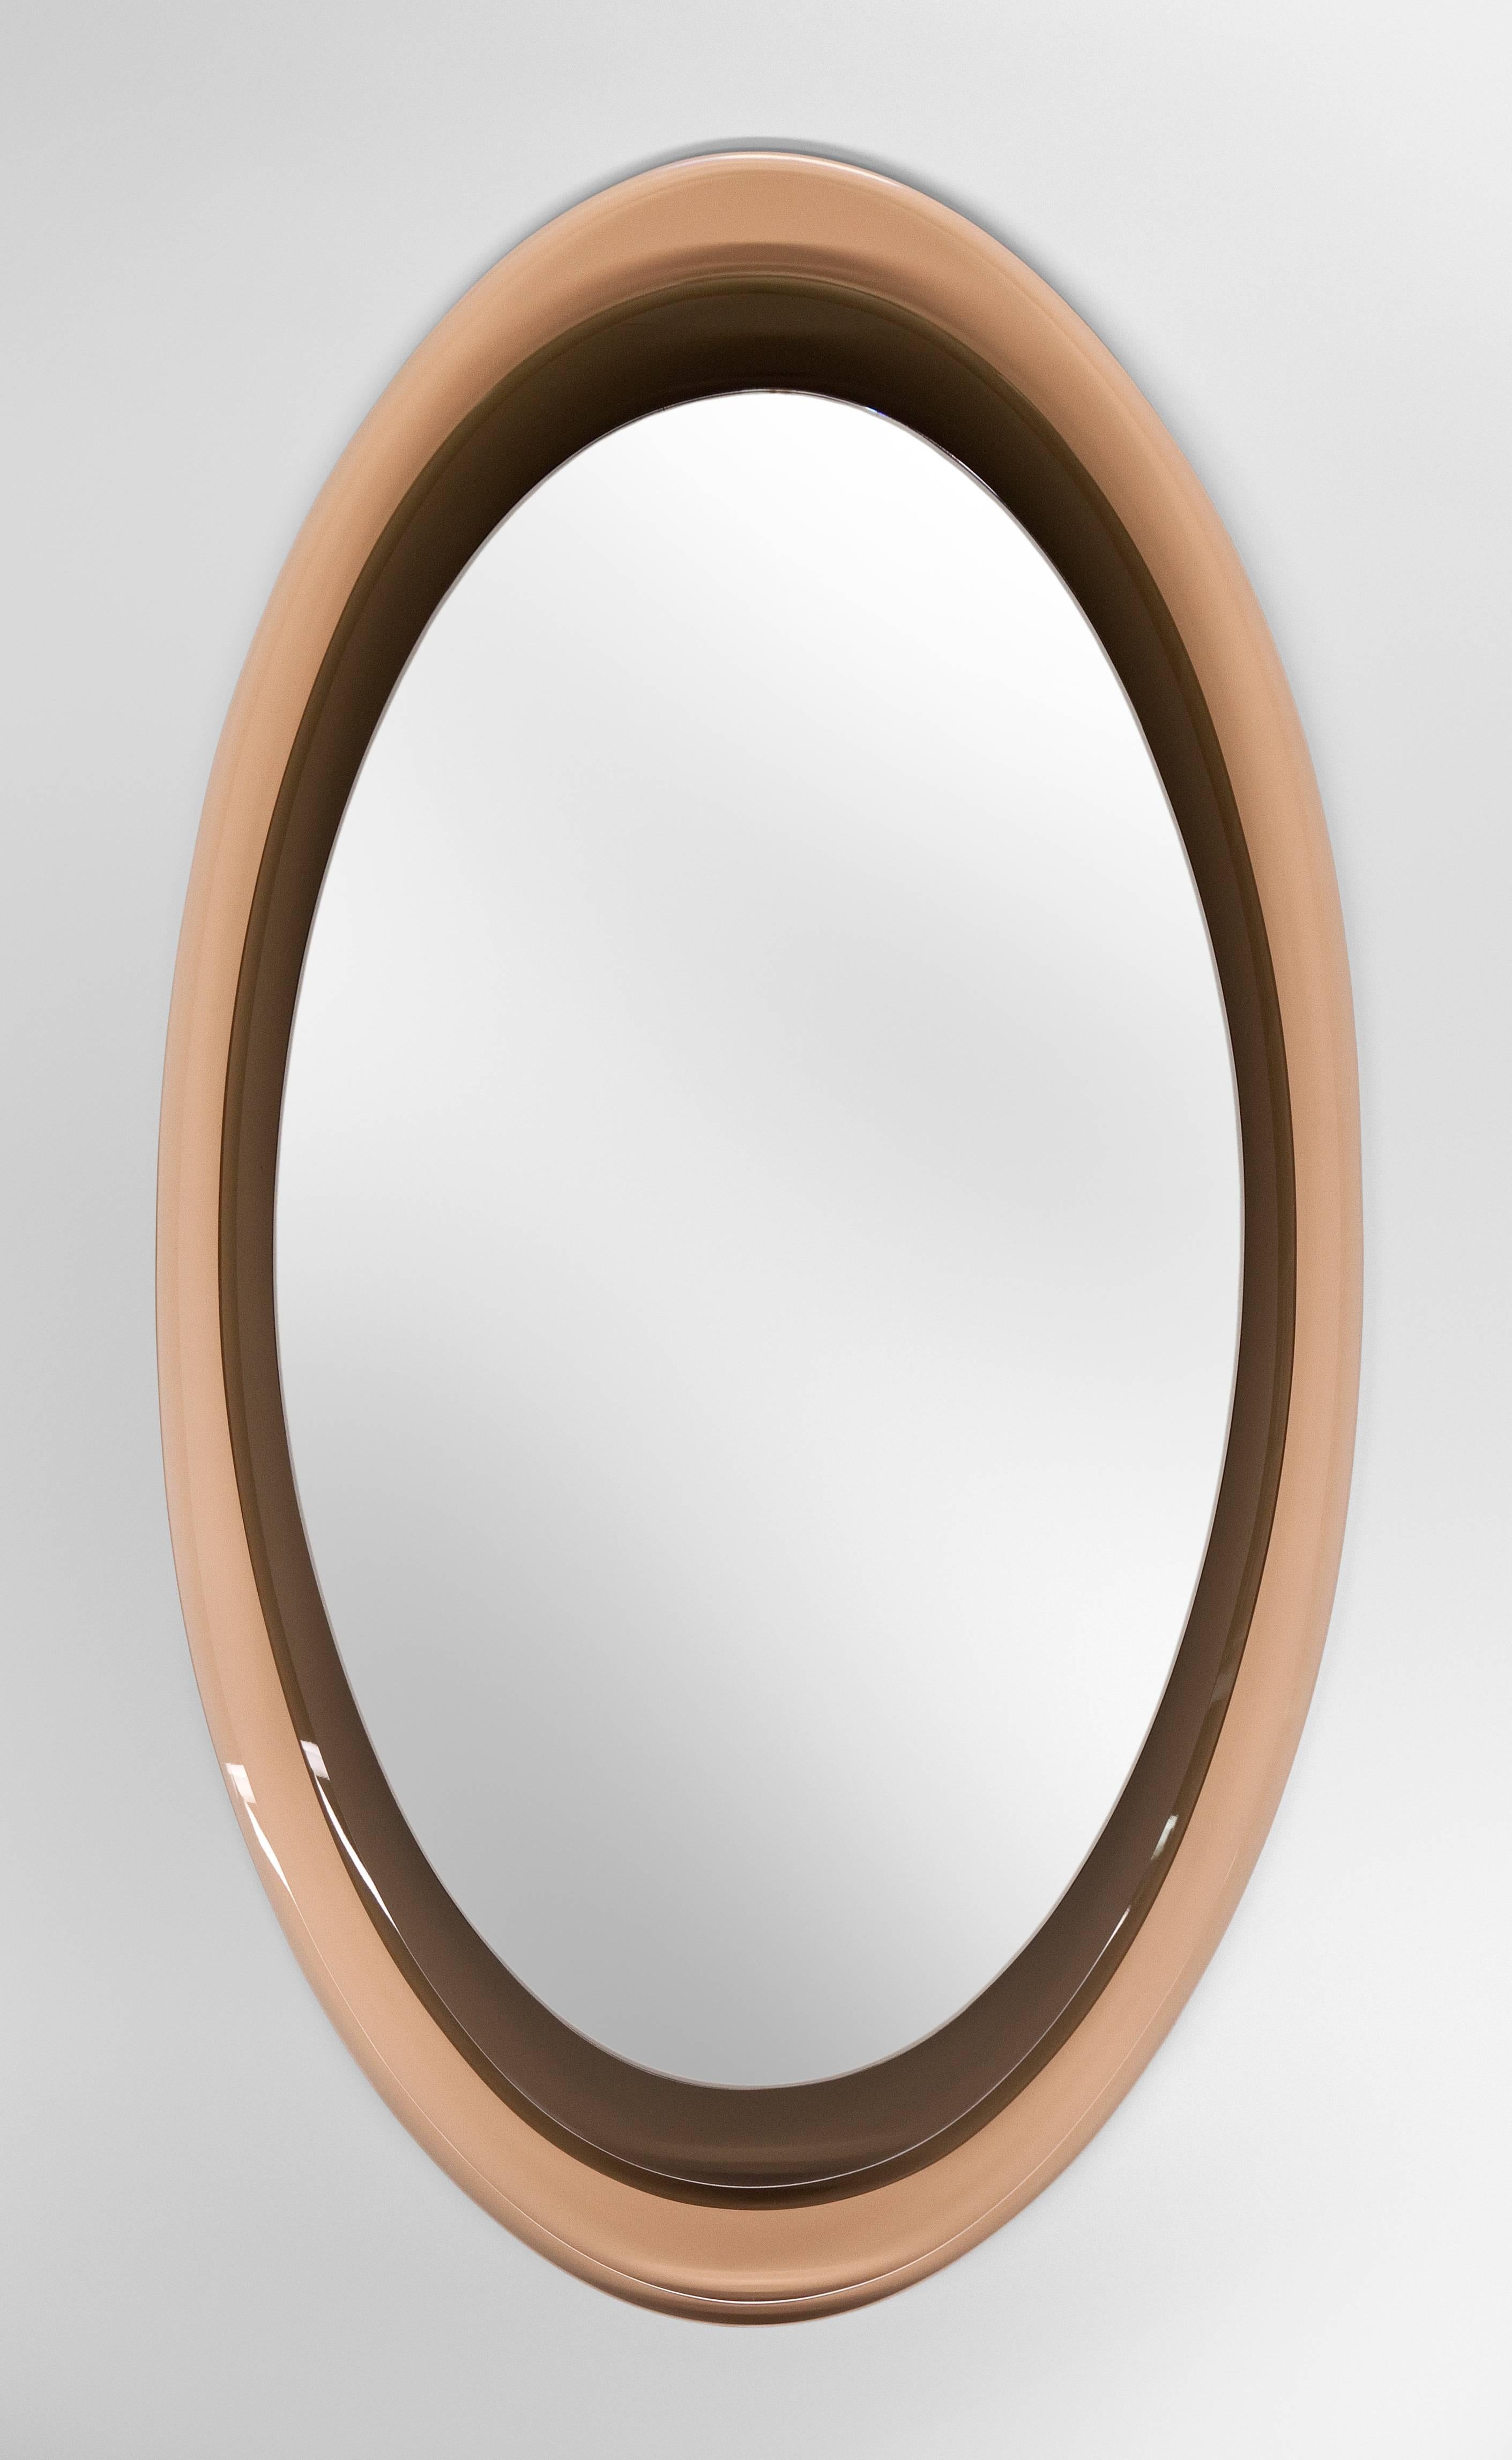 Max Ingrand for Fontana Arte, Two Color Glass Framed Mirror, Model 2046
A beautiful design, gorgeous glass and great condition. The elliptical mirror plate, floating above two tiers of beveled Fontana Arte rosambrato (rose amber) and grey colored